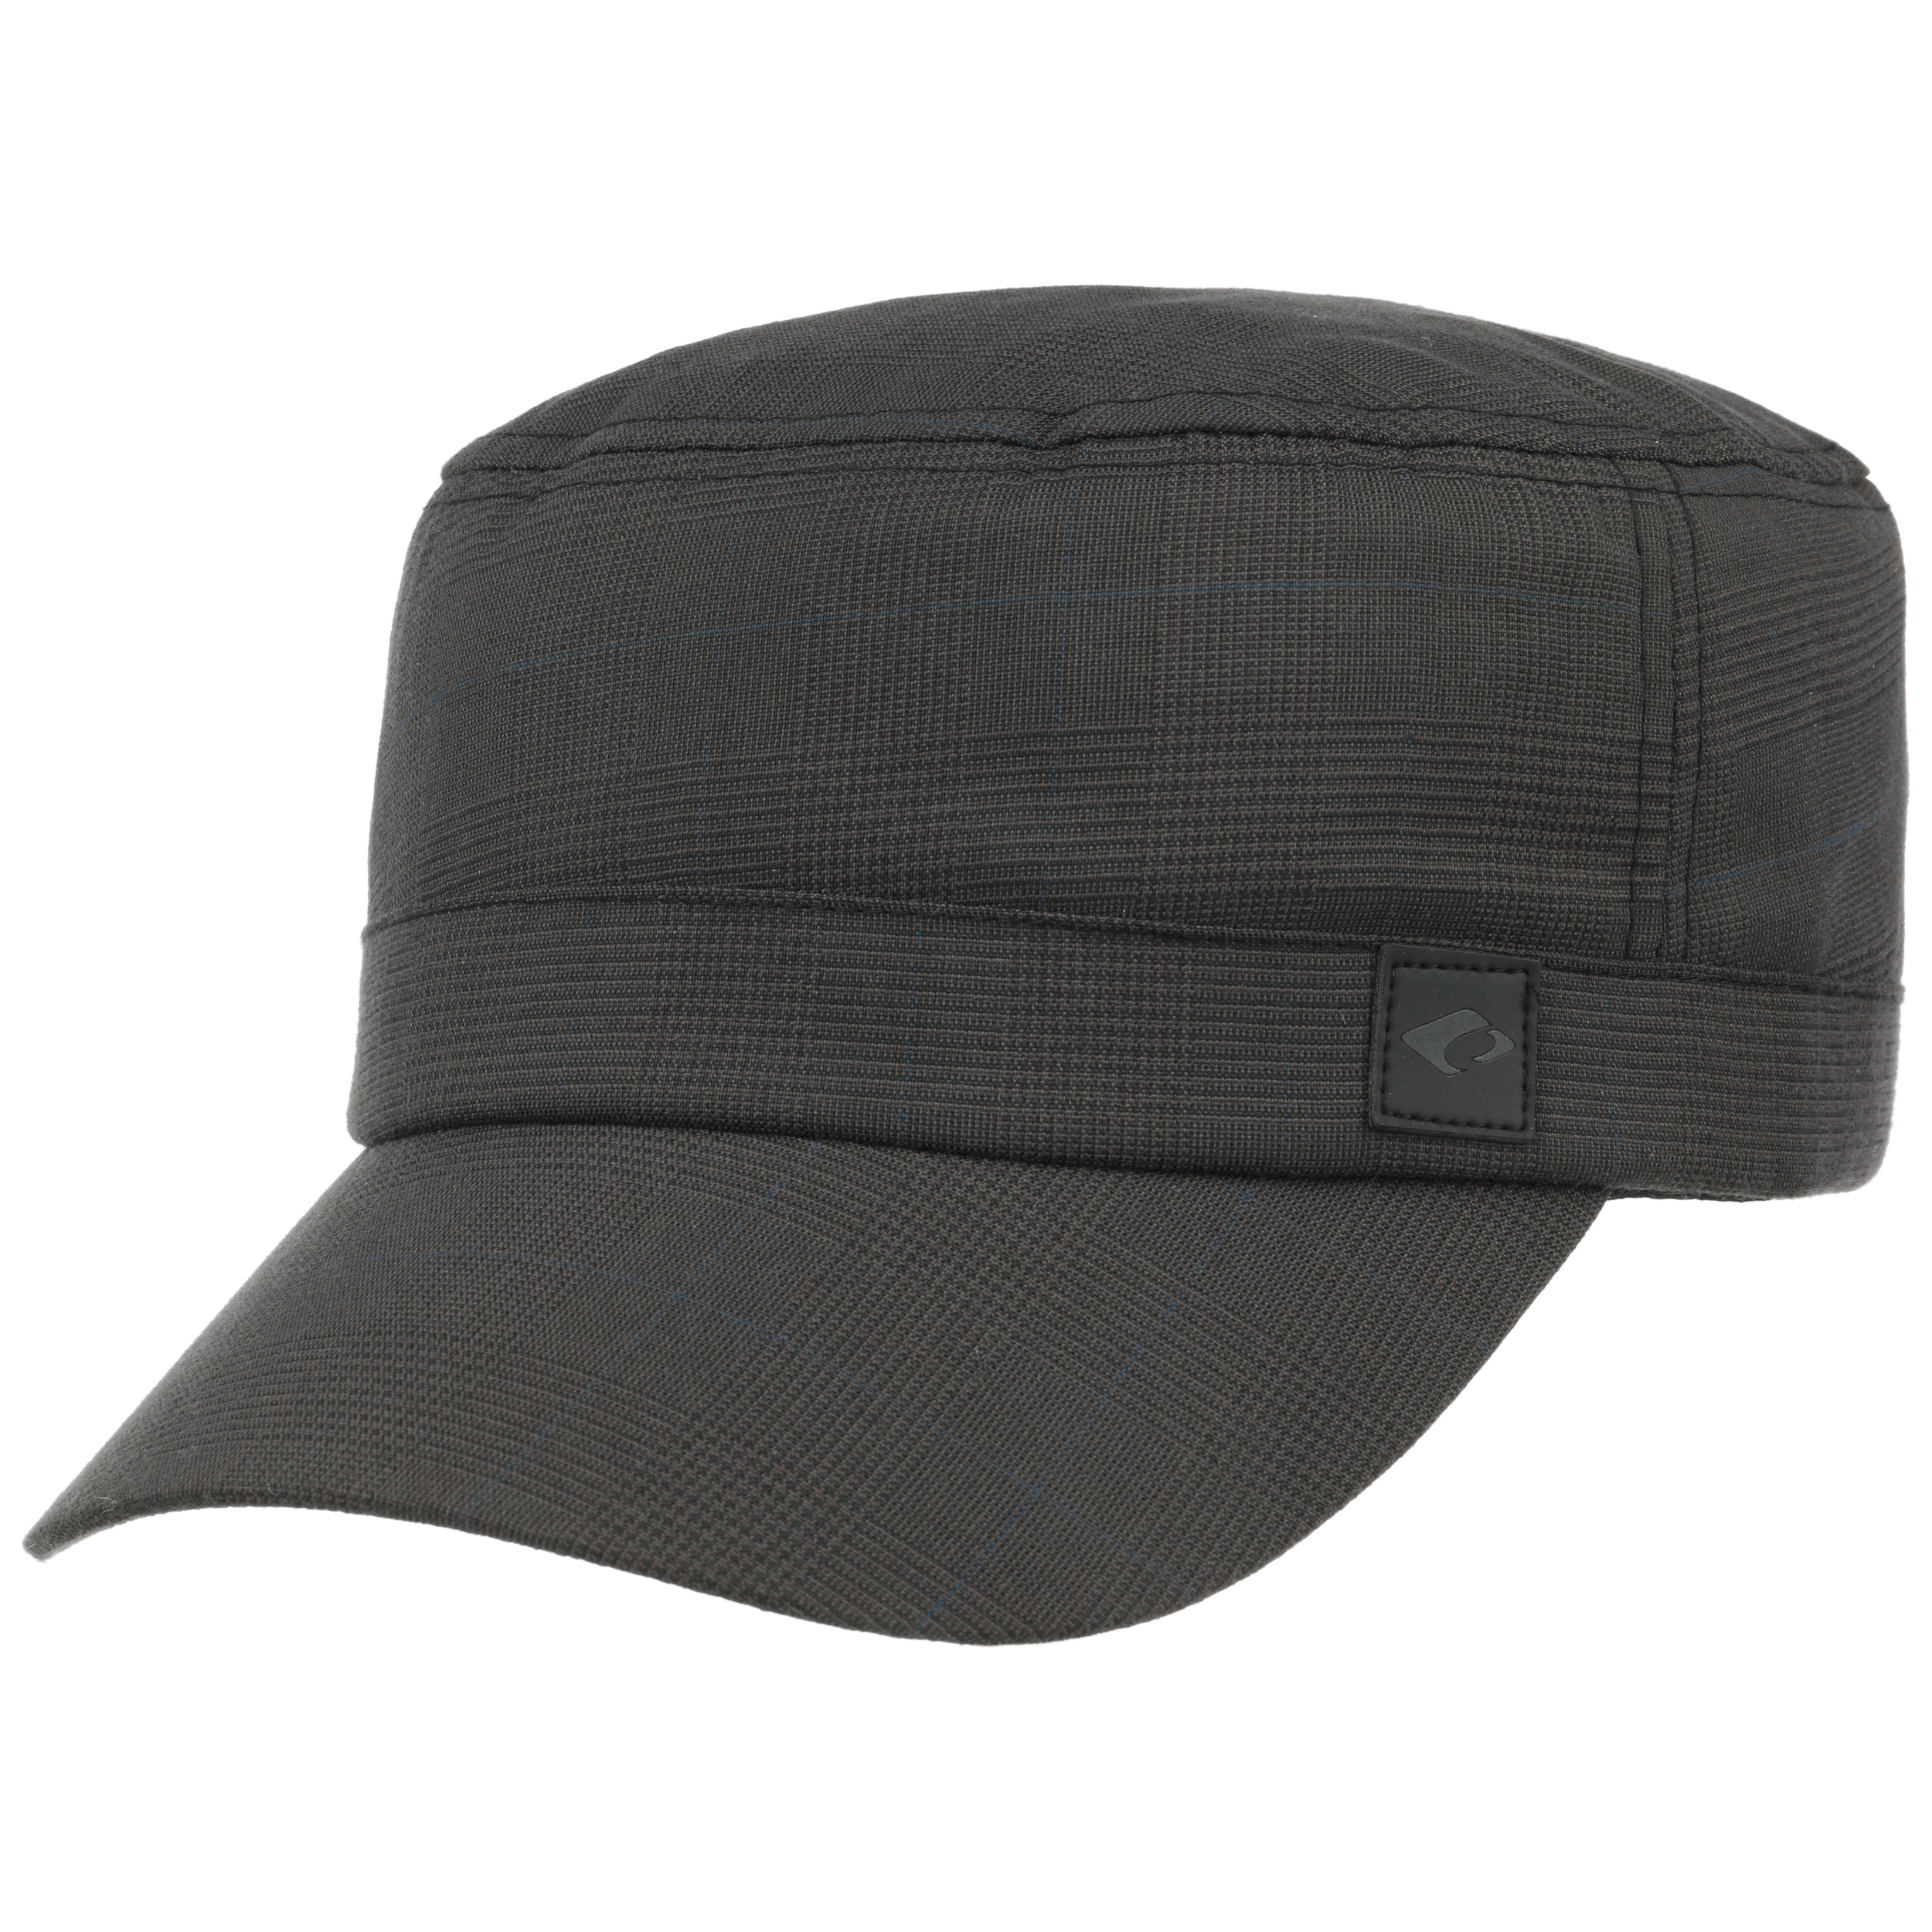 Sydney Army Cap Chillouts 17,95 £ by 